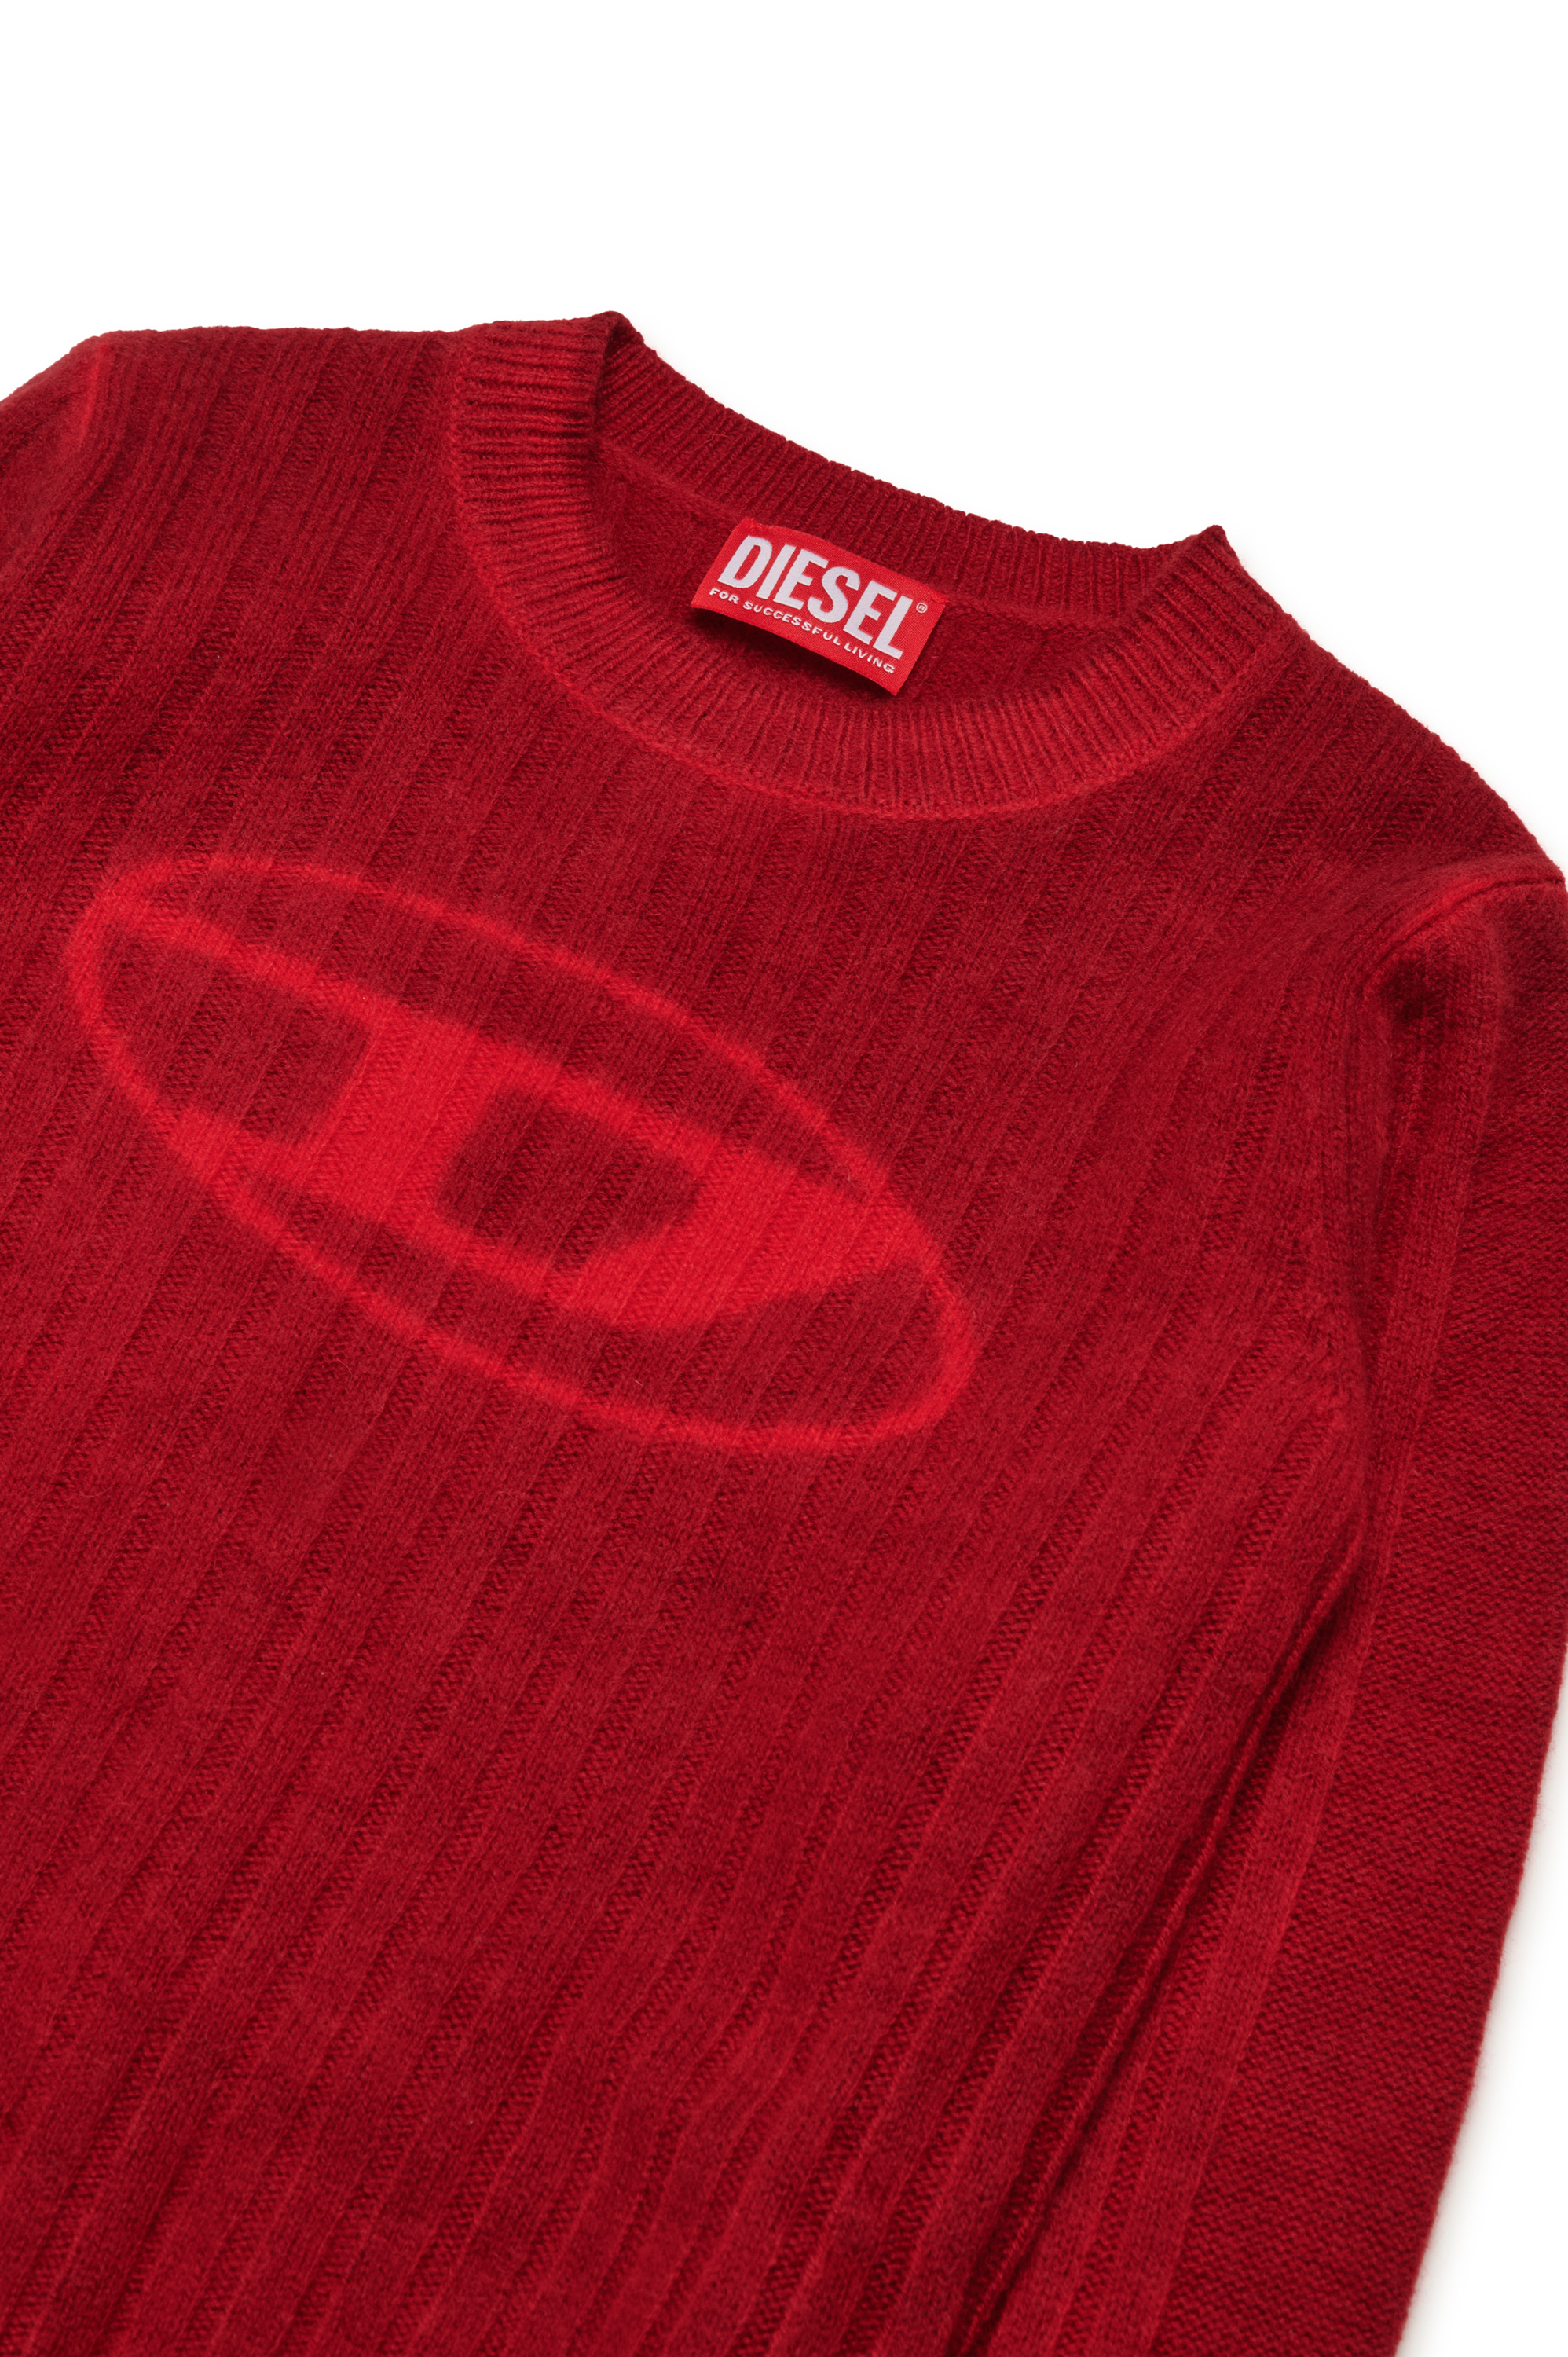 Diesel - KANDELEROD, Man Treated jumper with Oval D logo in Red - Image 2